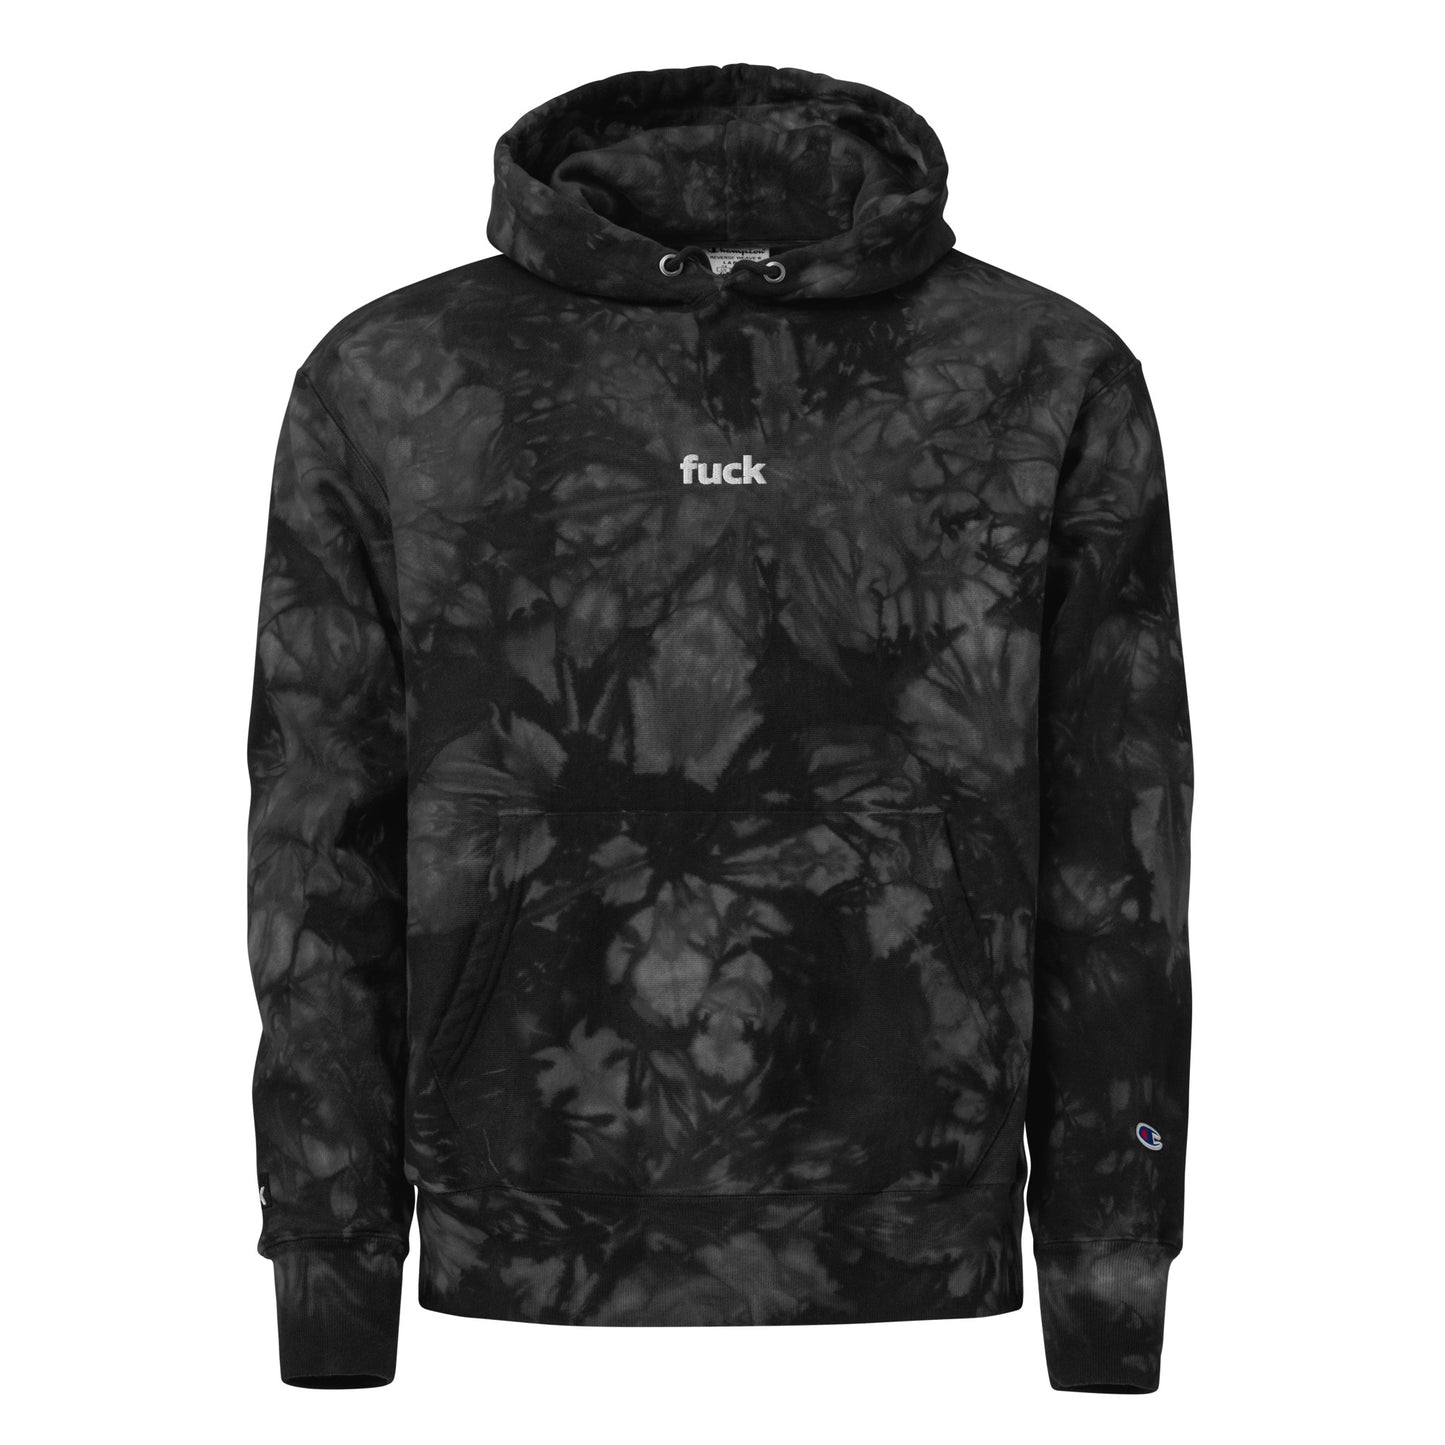 fuck embroidered tie dye hoodie